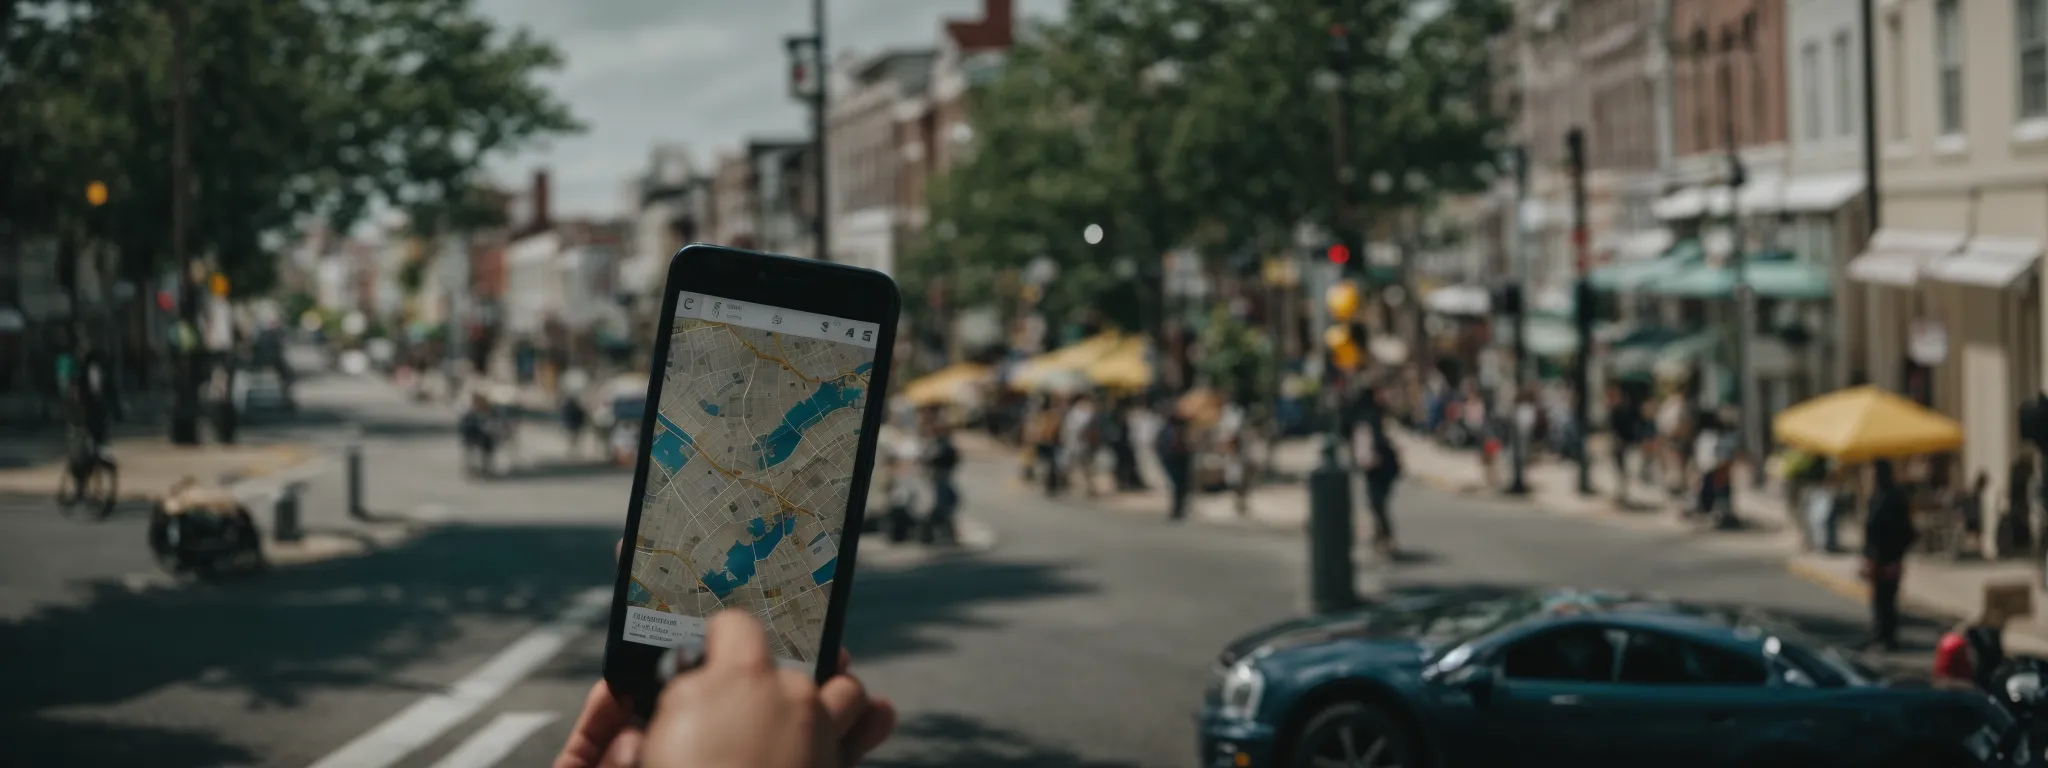 a person holding a smartphone with a map of maryland on the screen while standing on a busy city street.